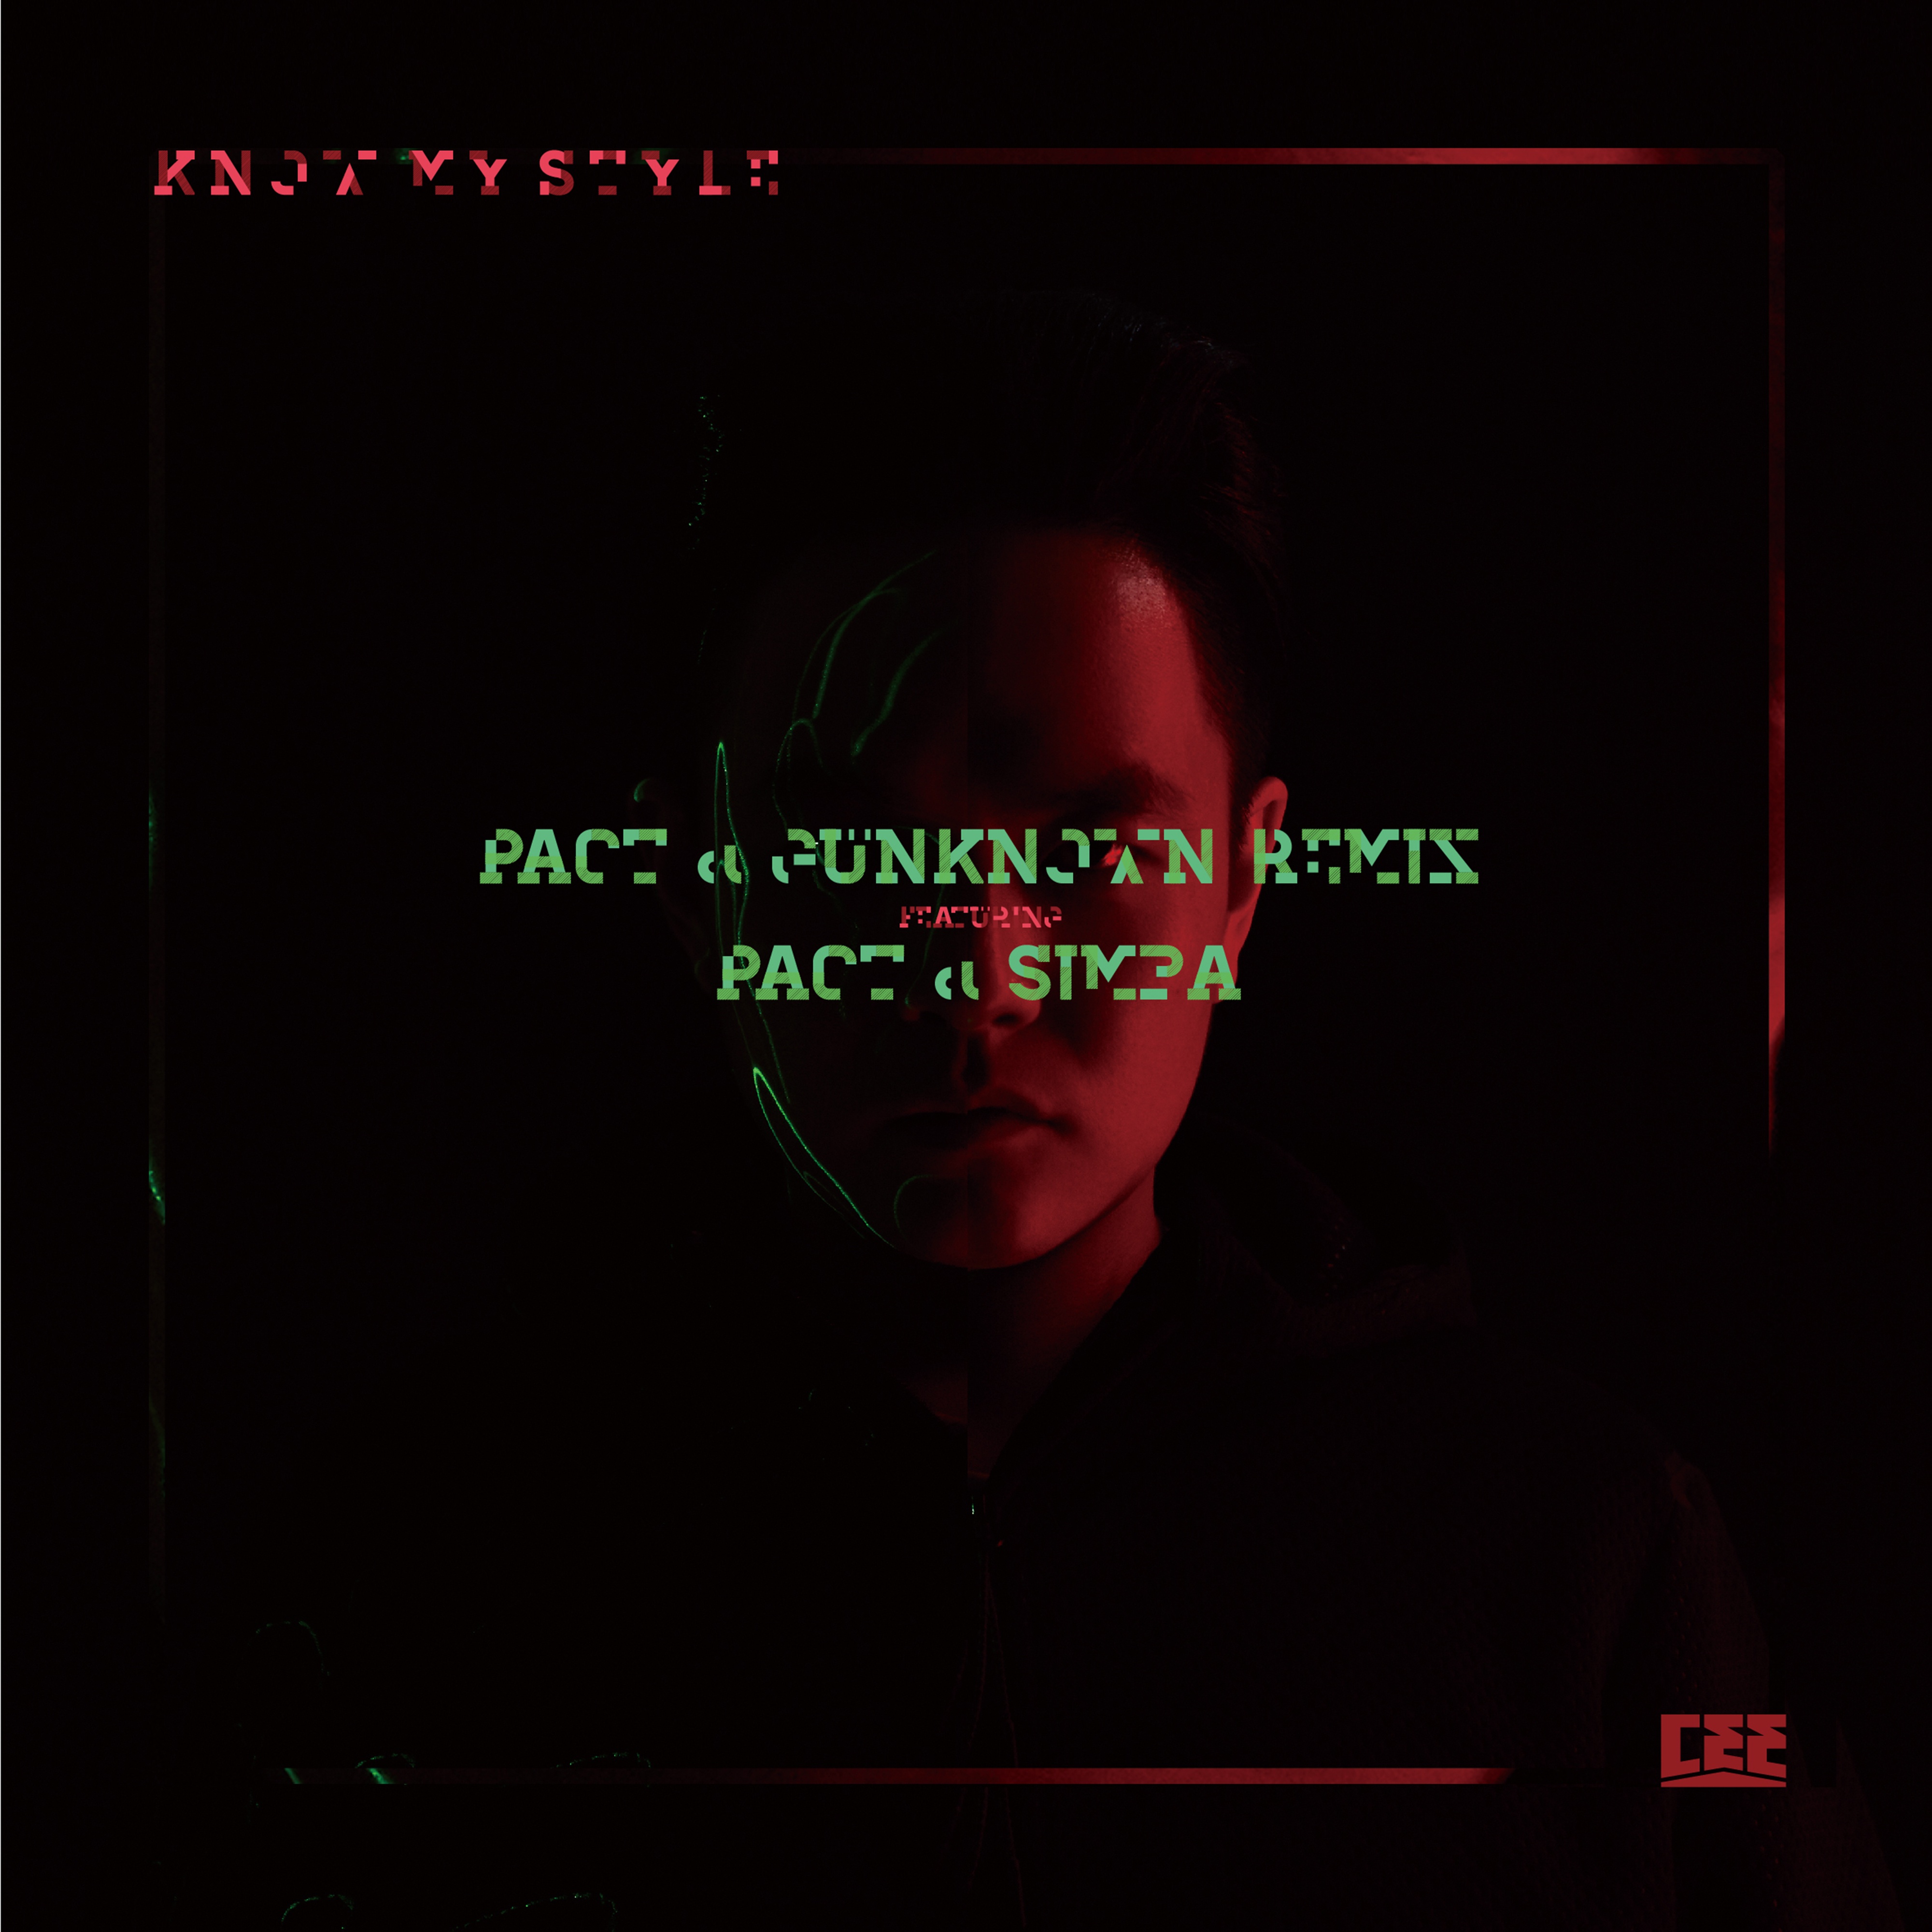 Know My Style PACT  Gunknown Remix featuring xin ba  PACT